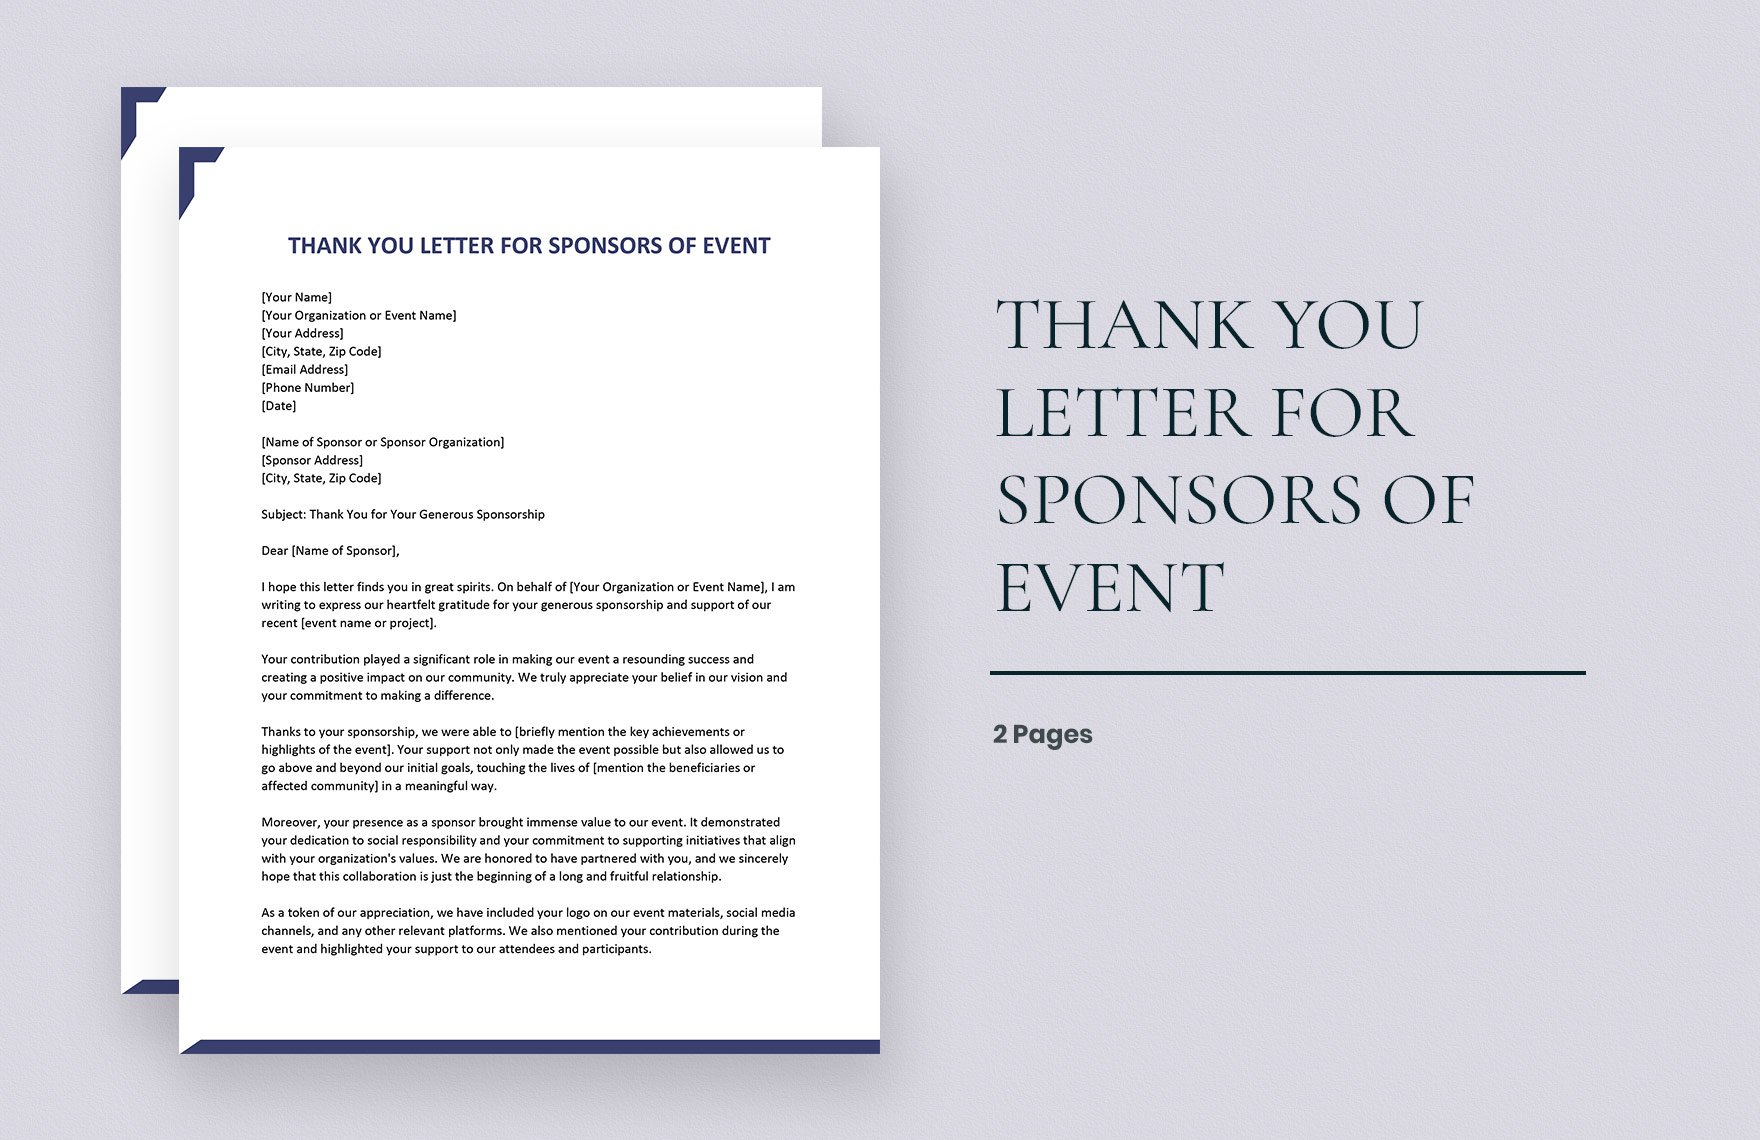 Free Thank You Letter for Sponsors of Event in Word, Google Docs, Apple Pages